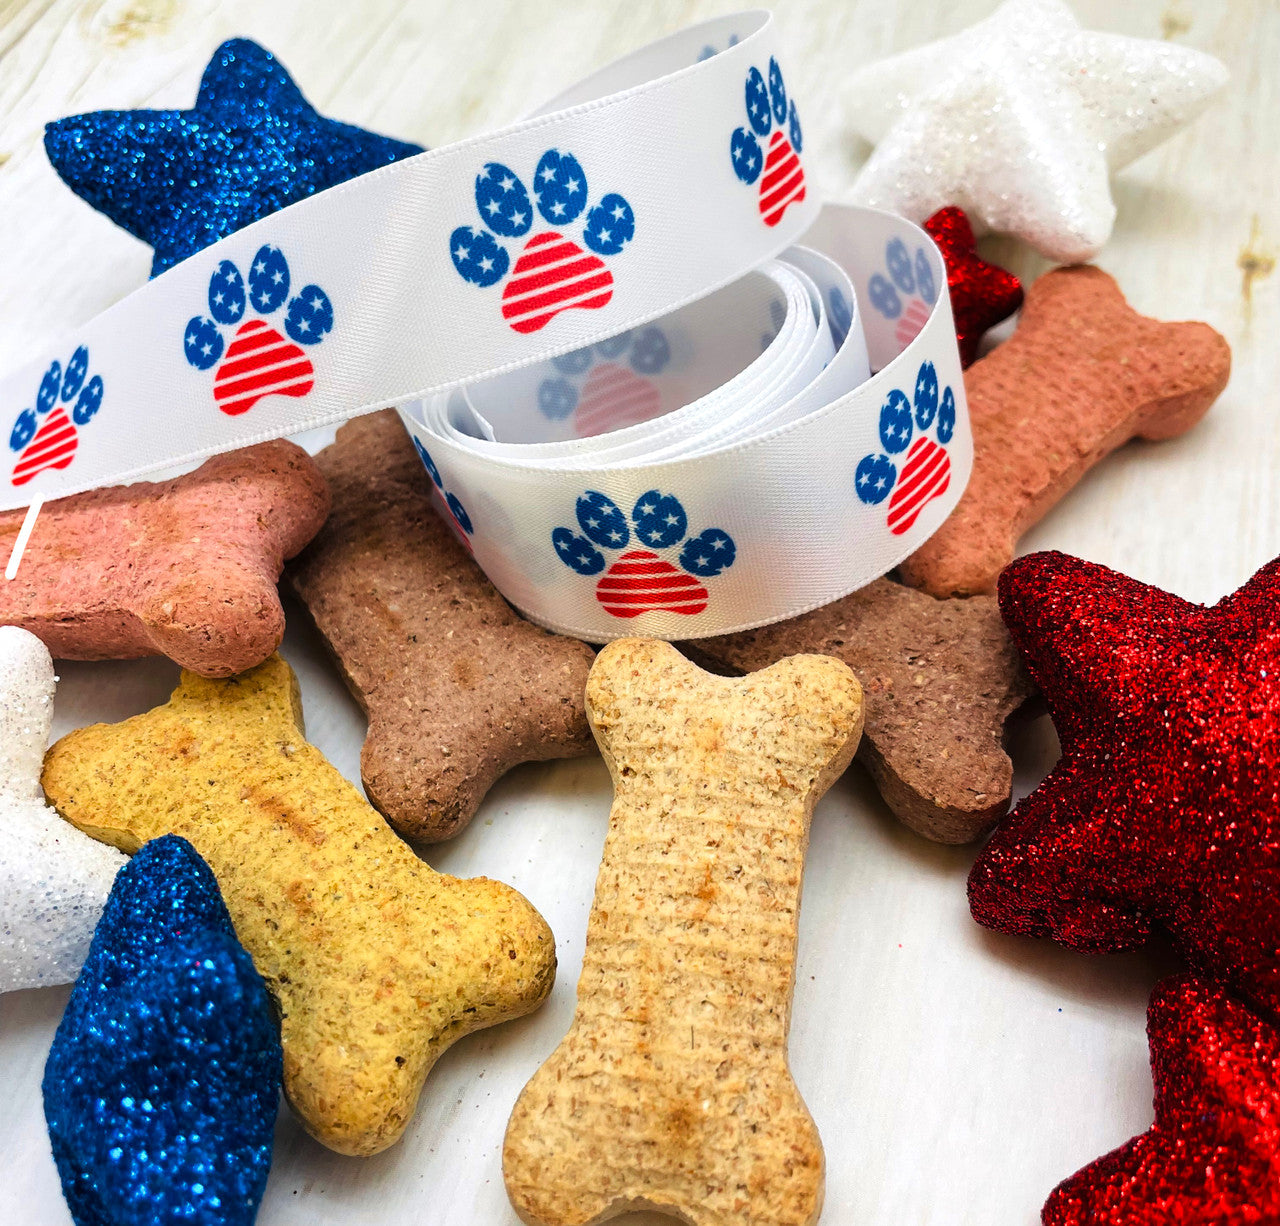 Tie a few dog treats with our patriotic paw prints to bring along to the 4th of July barbecue for the furry family members!